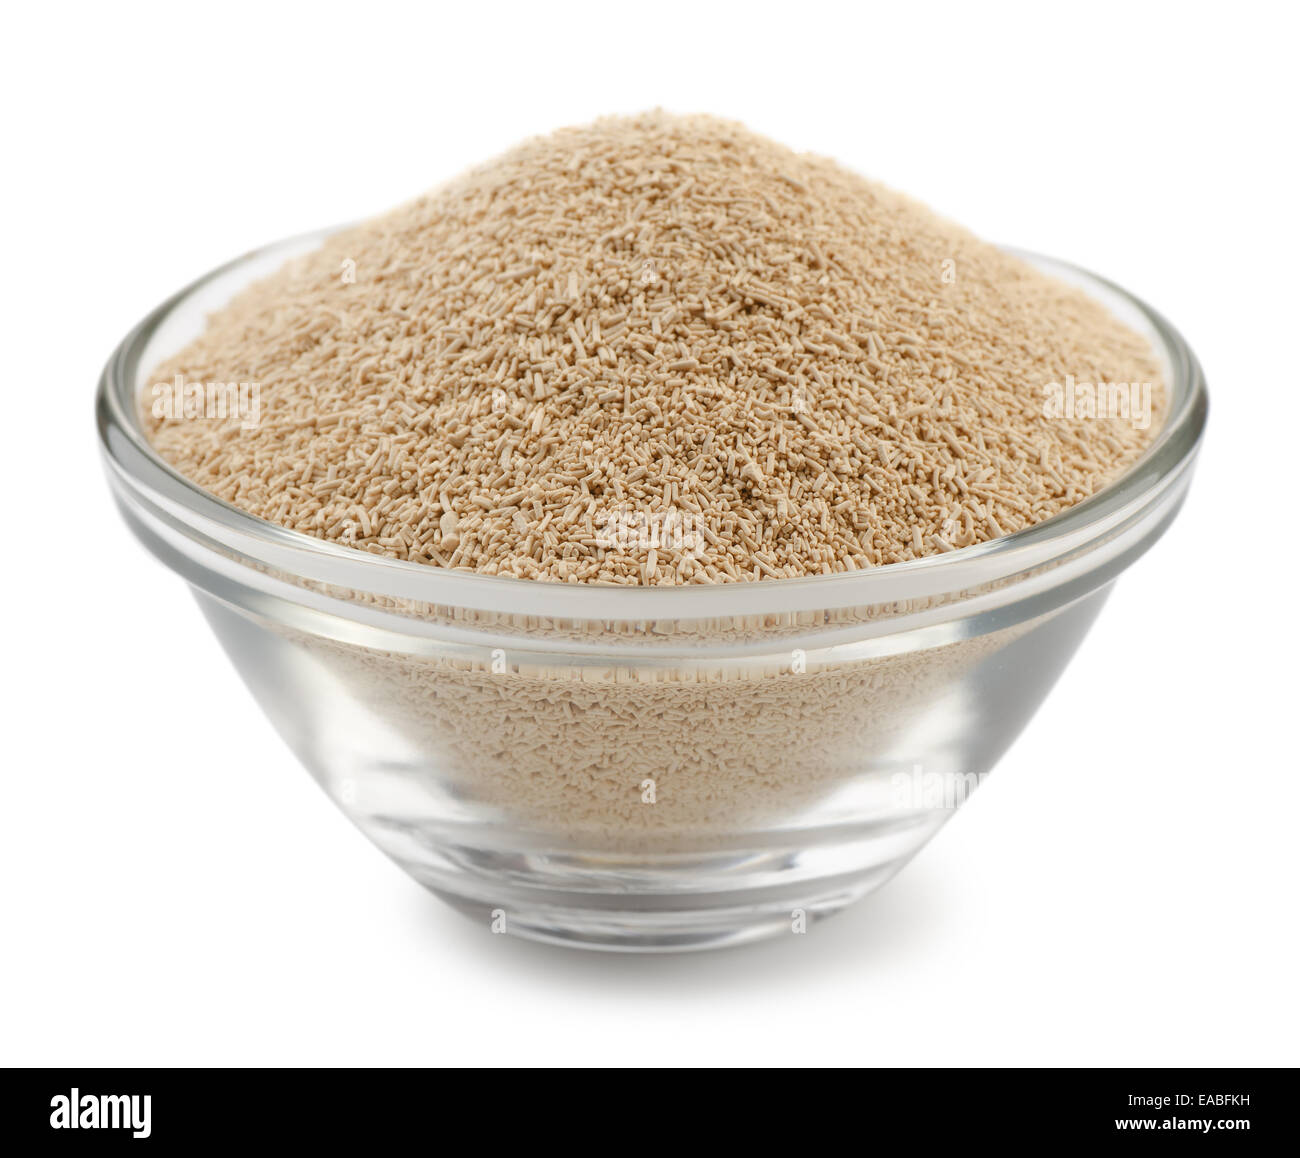 Dry yeast granules in glass bowl isolated on white Stock Photo